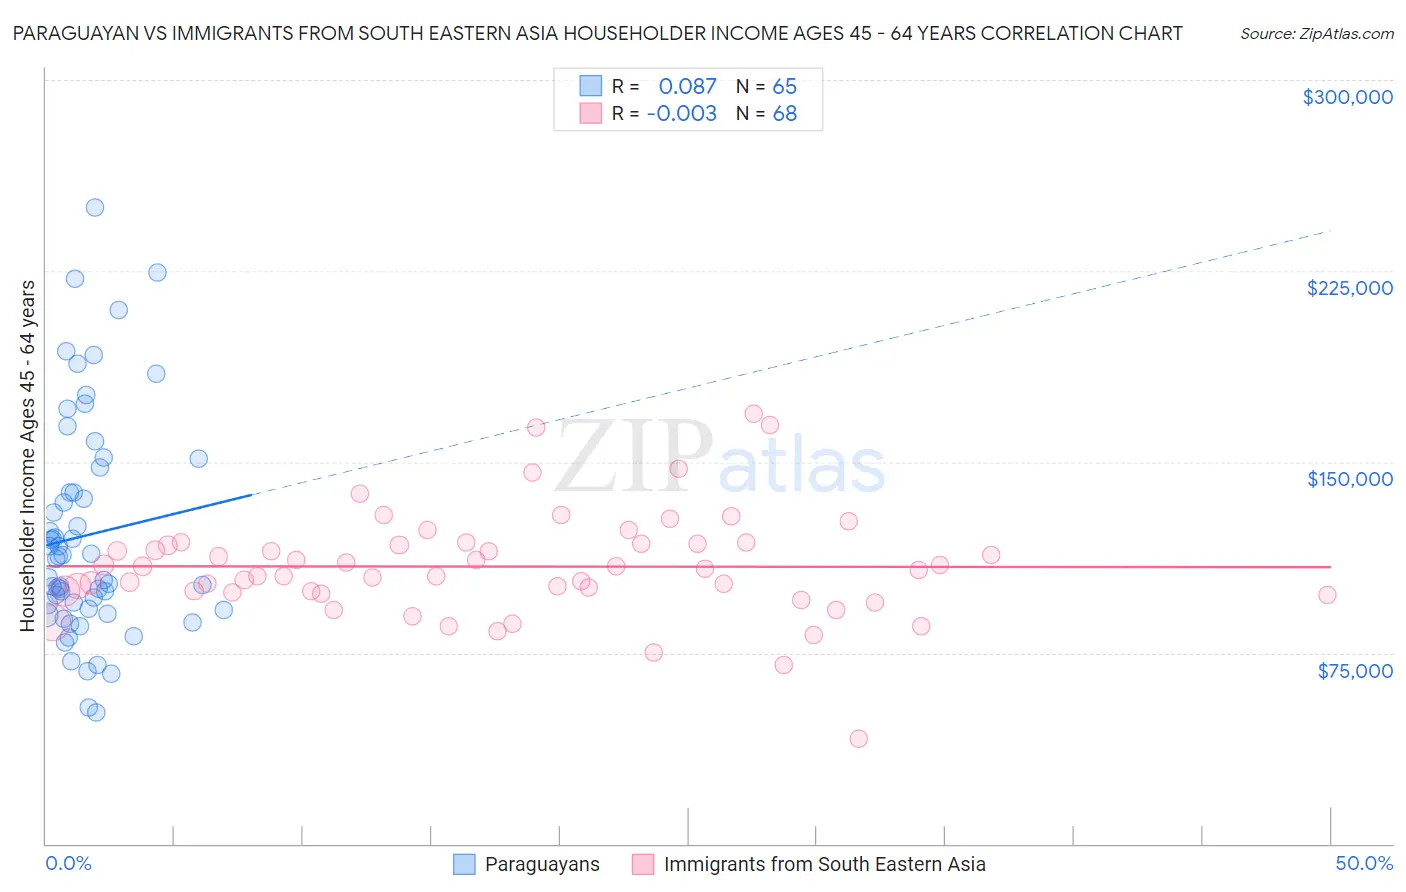 Paraguayan vs Immigrants from South Eastern Asia Householder Income Ages 45 - 64 years